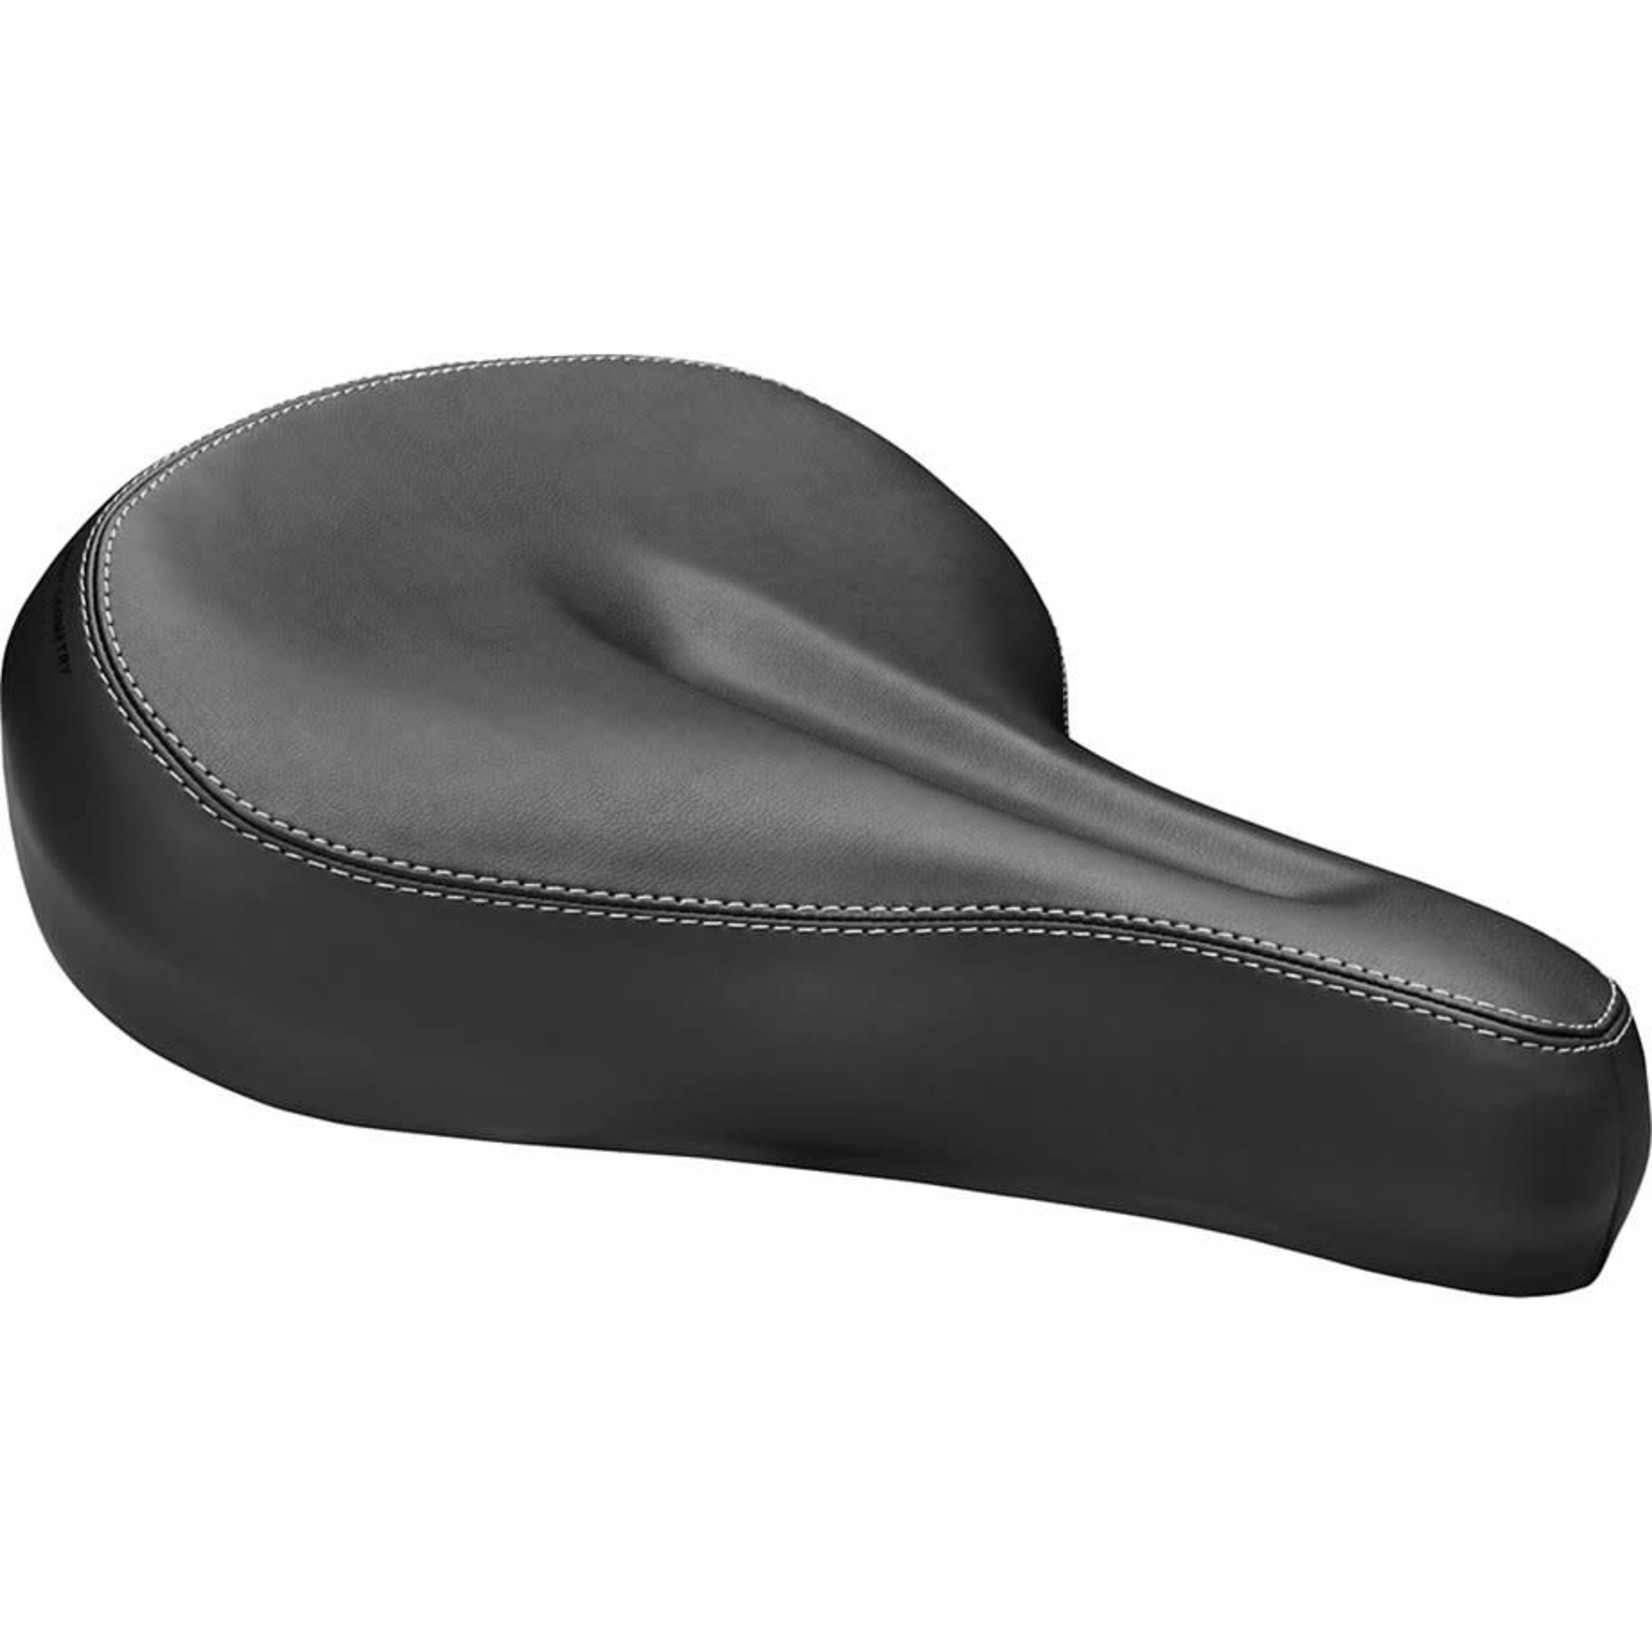 Specialized Specialized The Cup Saddle Black